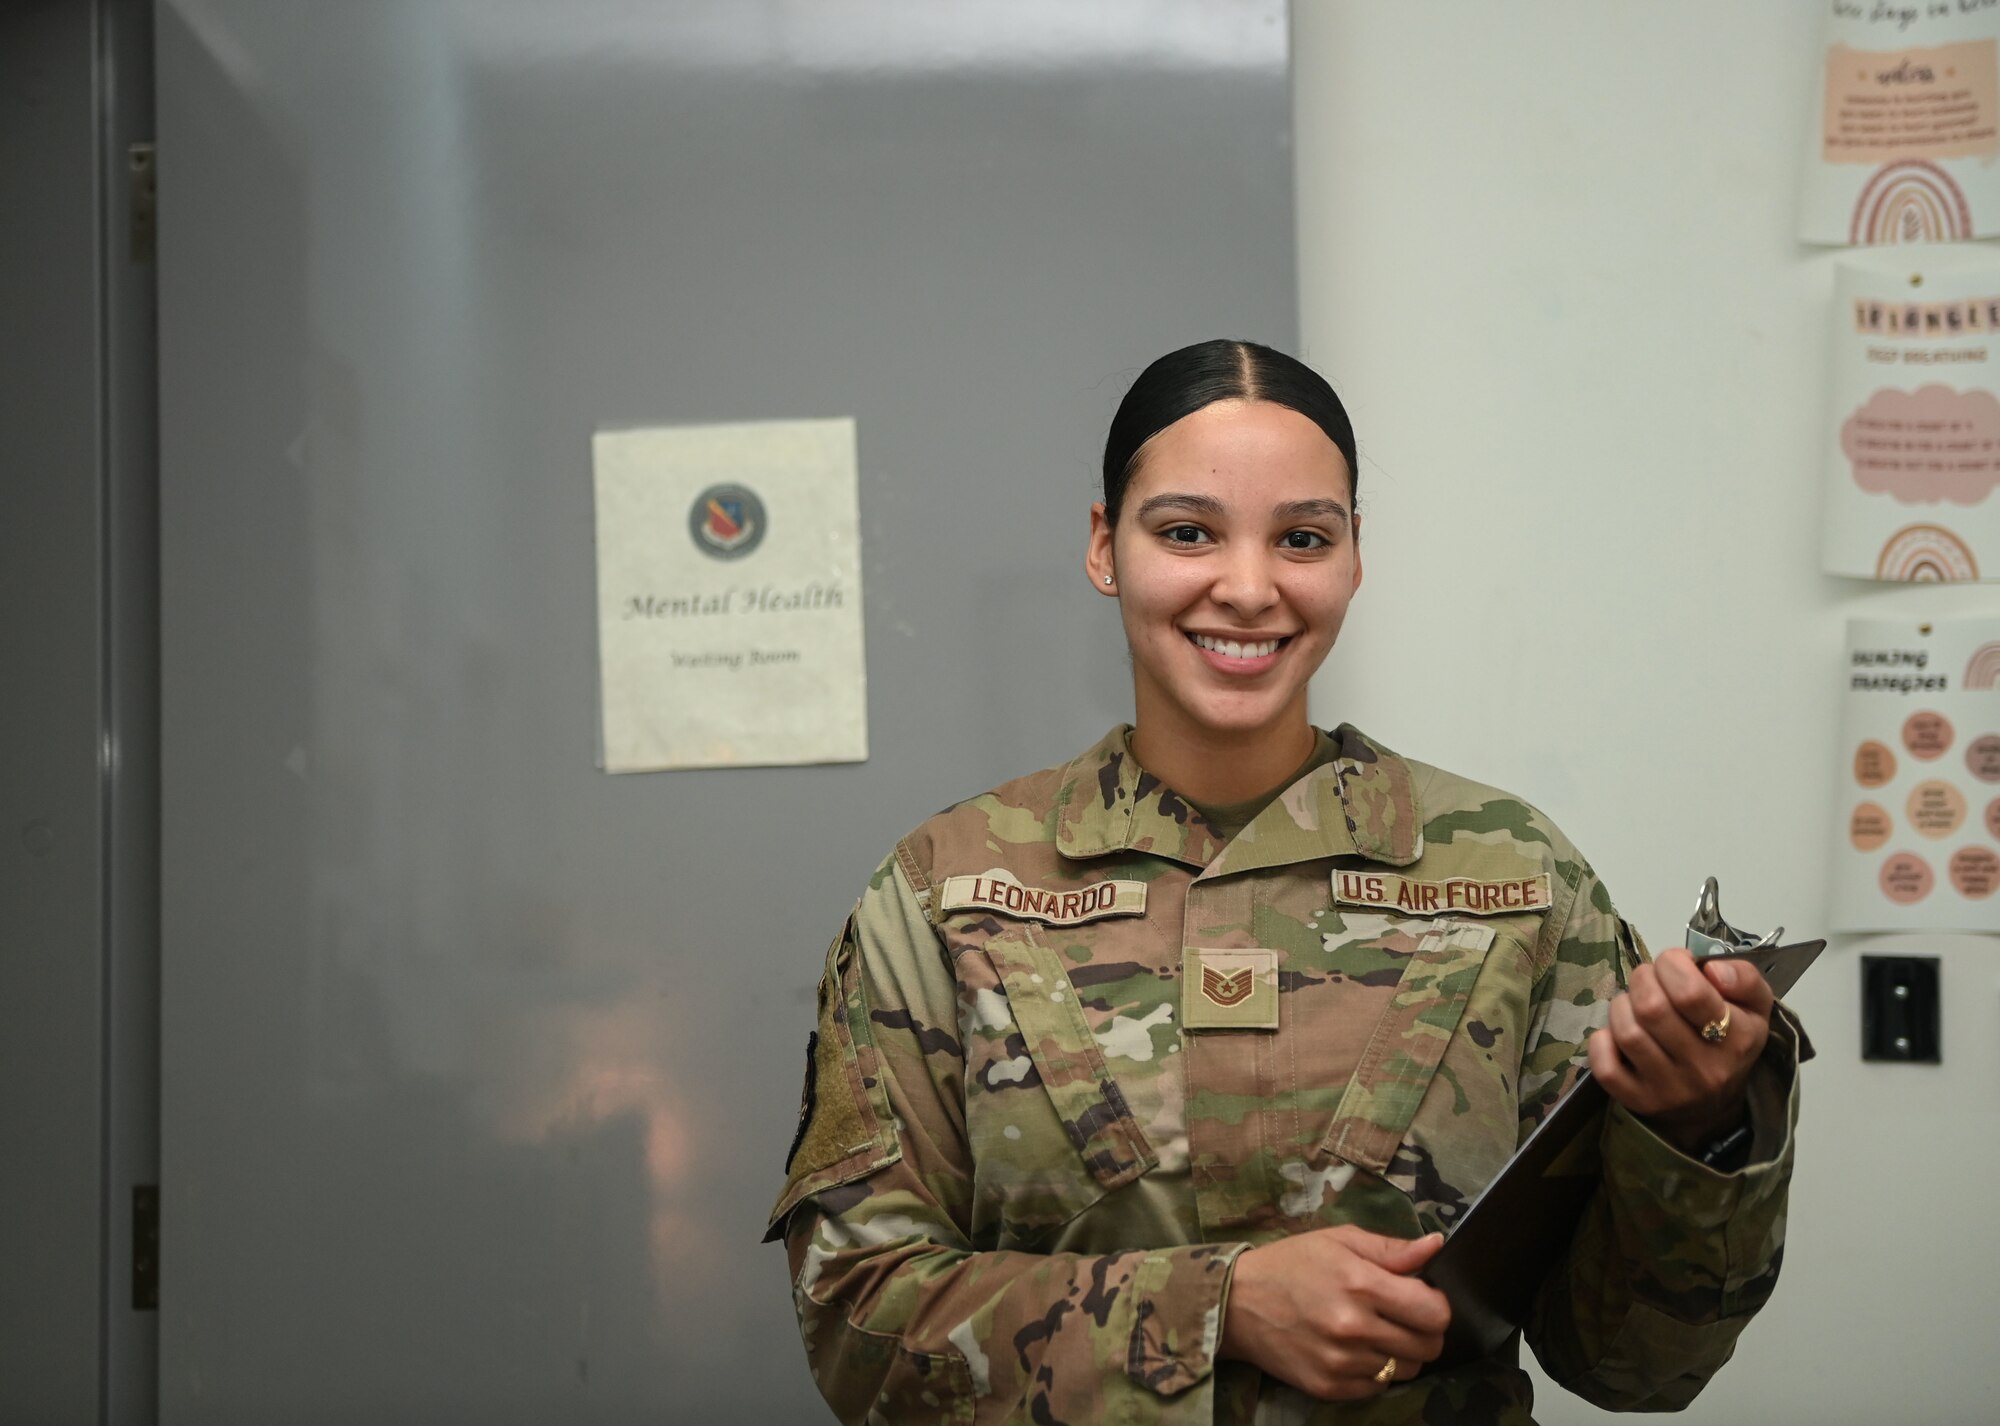 U.S. Air Force Tech. Sgt. Melissa Leonardo, a 379th Expeditionary Medical Group mental health technician, poses for a photo at the Mental Health Office waiting room Aug 23, 2022 at Al Udeid Air Base, Qatar. The Mental Health Office is a specialty clinic designed to treat significant depression, anxiety and trauma. (U.S. Air National Guard photo by Master Sgt. Michael J. Kelly)